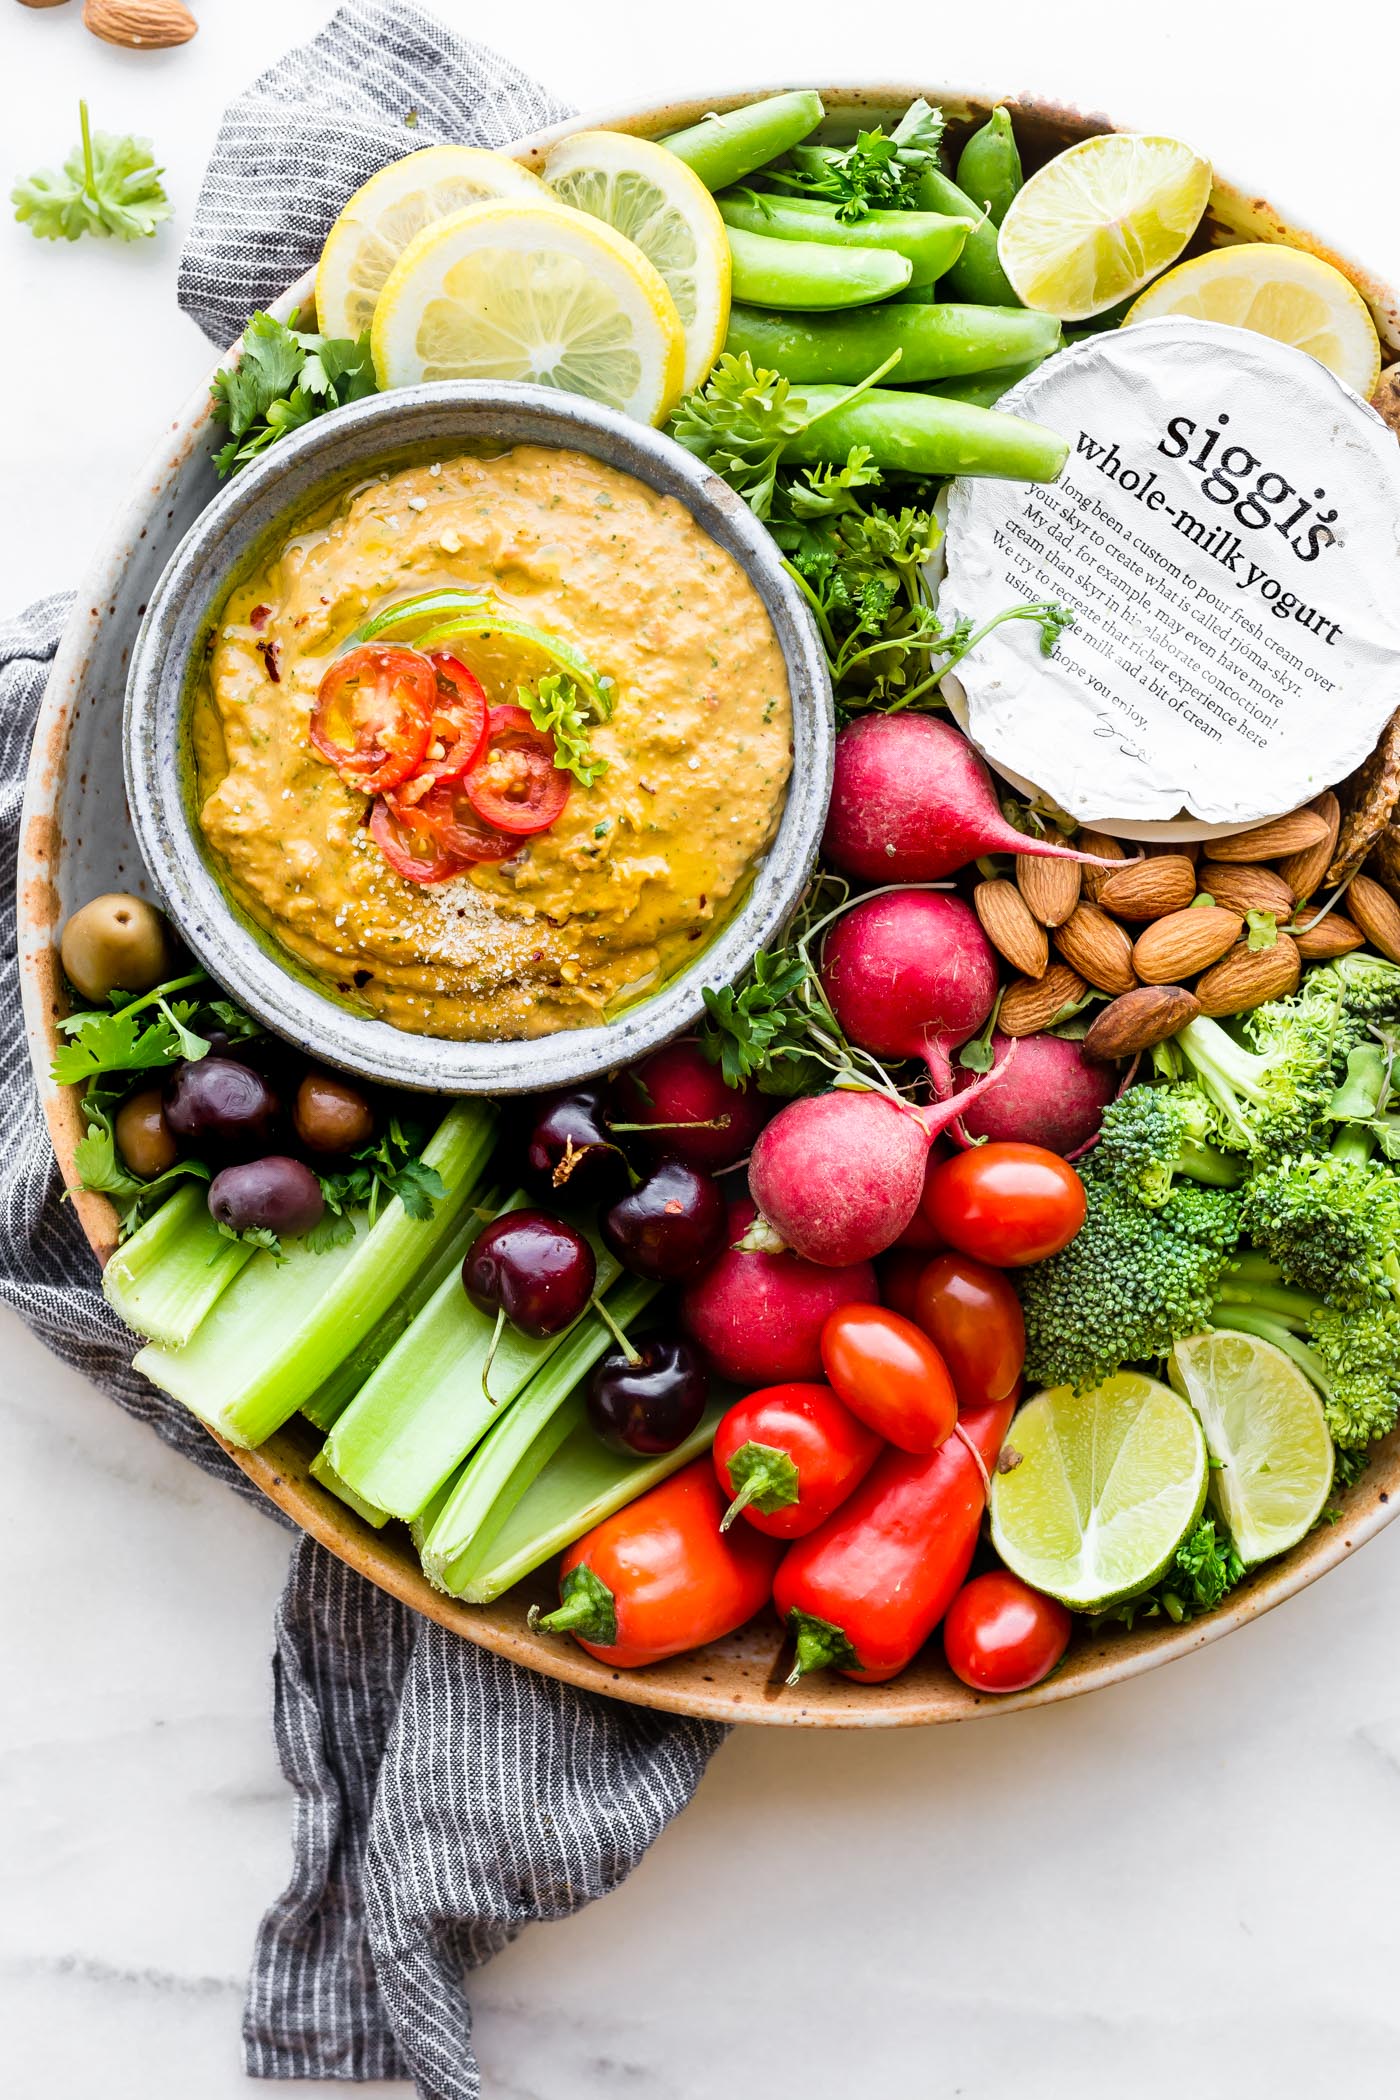 Spicy Mango Avocado yogurt dip! A NEW way to eat veggies! This Spicy mango avocado yogurt dipping sauce is NOT your average healthy appetizer! Mango, yogurt, avocado, and a kick of spice from chilis makes this easy snack recipe a protein rich dip! @siggisdairy! #ad